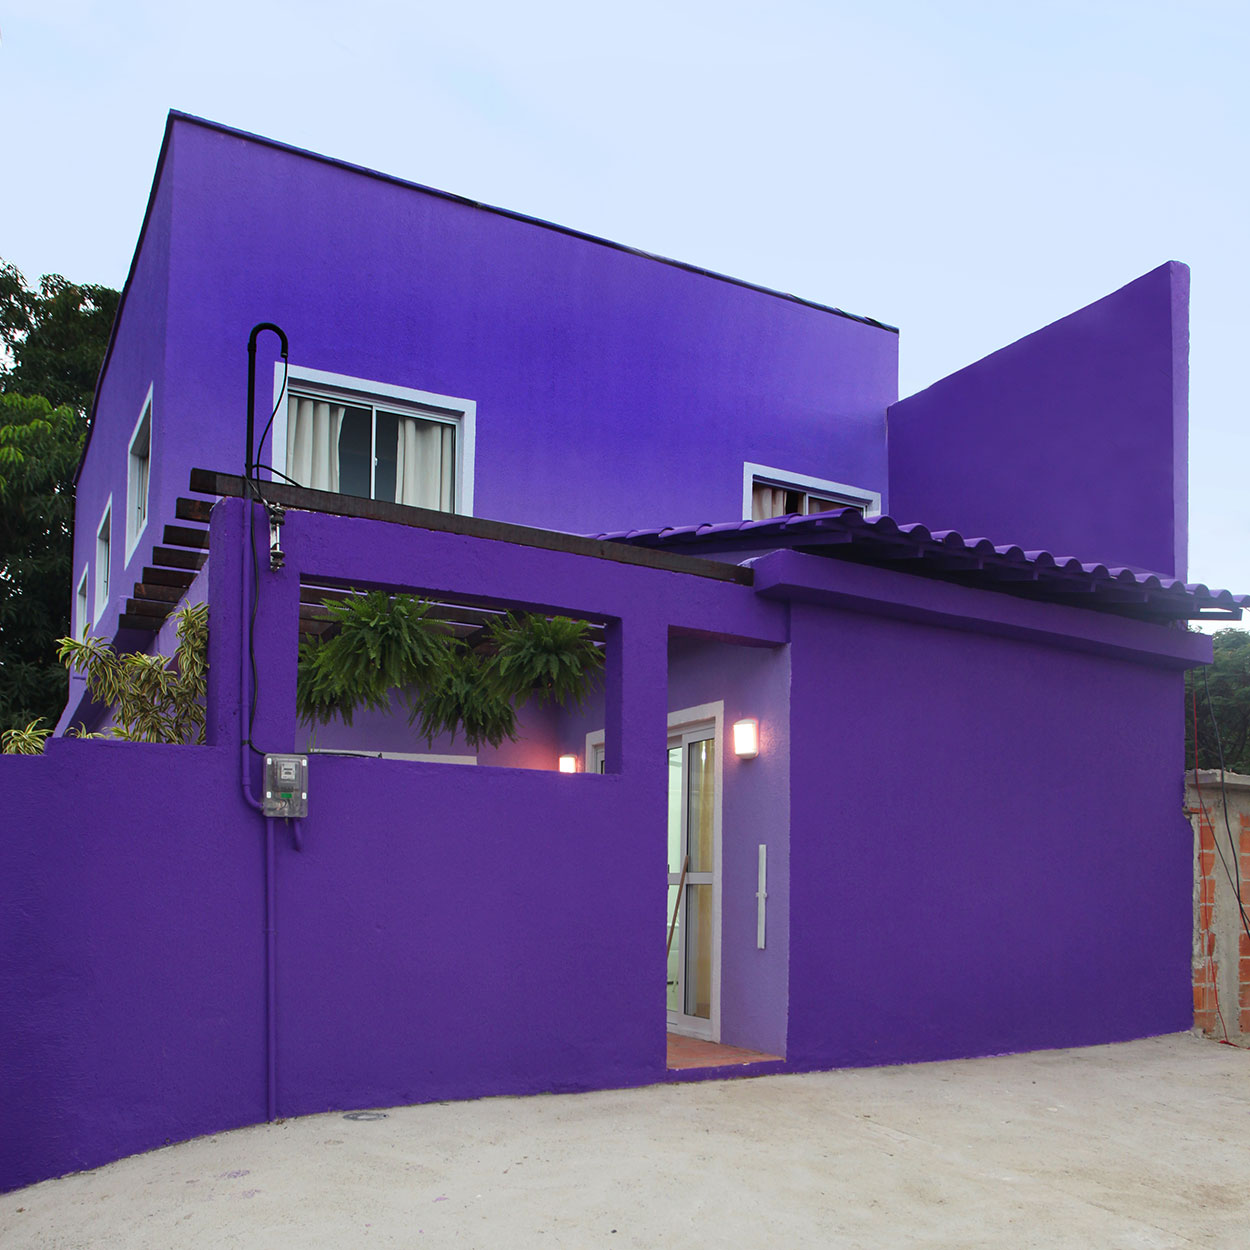 A monochromatic house stands out much more for its painting than for its architecture